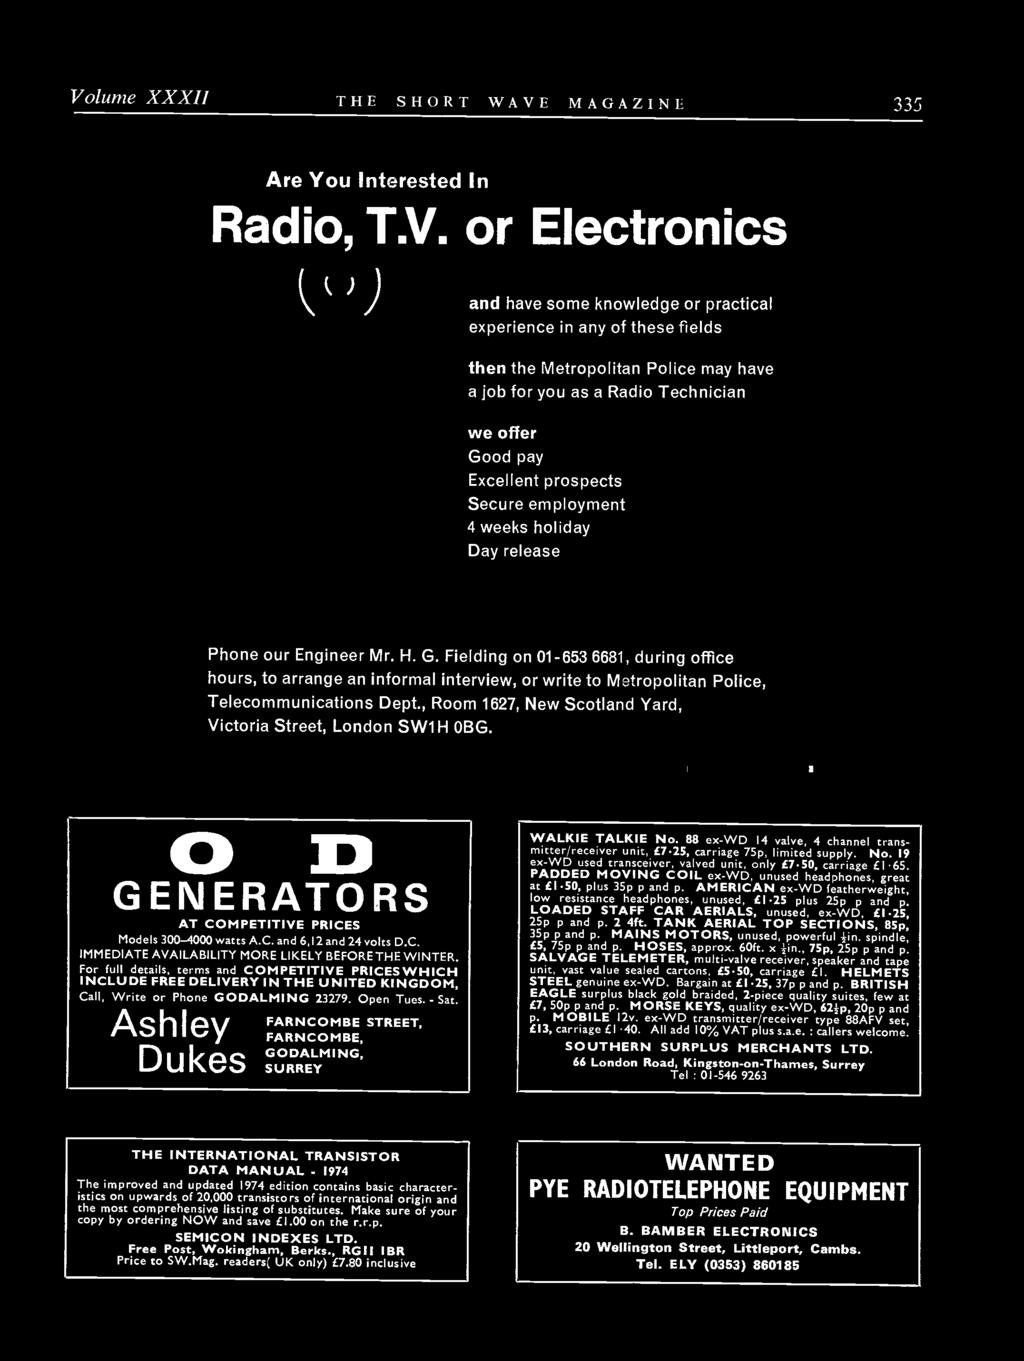 Volume XXXII THE SHORT WAVE MAGAZINE 335 Are You Interested In Radio, T.V. or Electronics and have some knowledge or practical experience in any of these fields then the Metropolitan Police may have